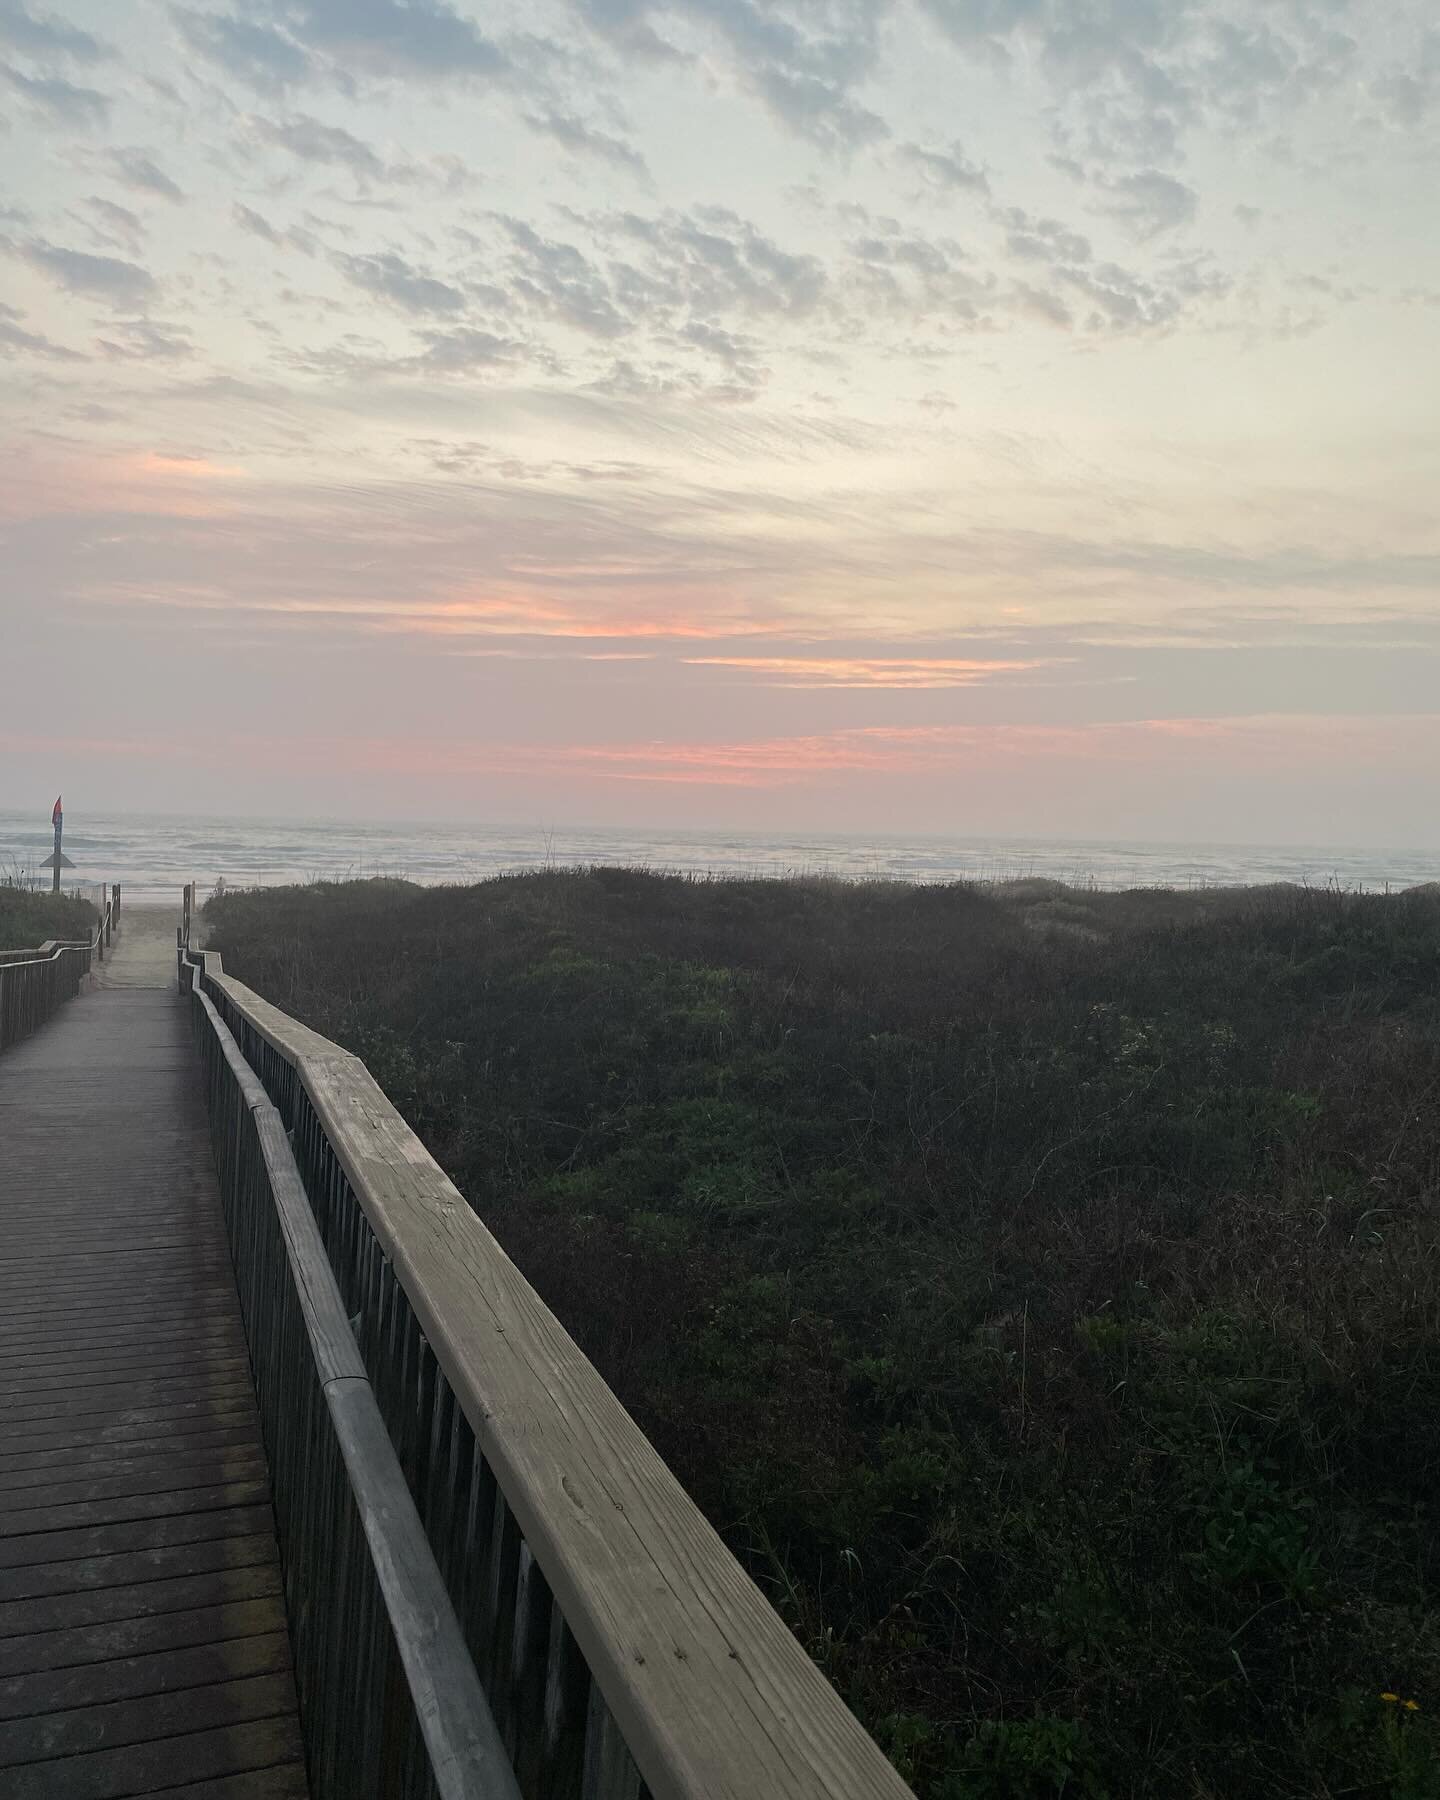 I&rsquo;m in South Padre for a long weekend with friends and I snuck out this morning to see the sunrise. And by snuck out I mean in my pjs with a sweatshirt and jacket. Bed head and all. 😄 Glad I didn&rsquo;t miss it though, of course the pics don&